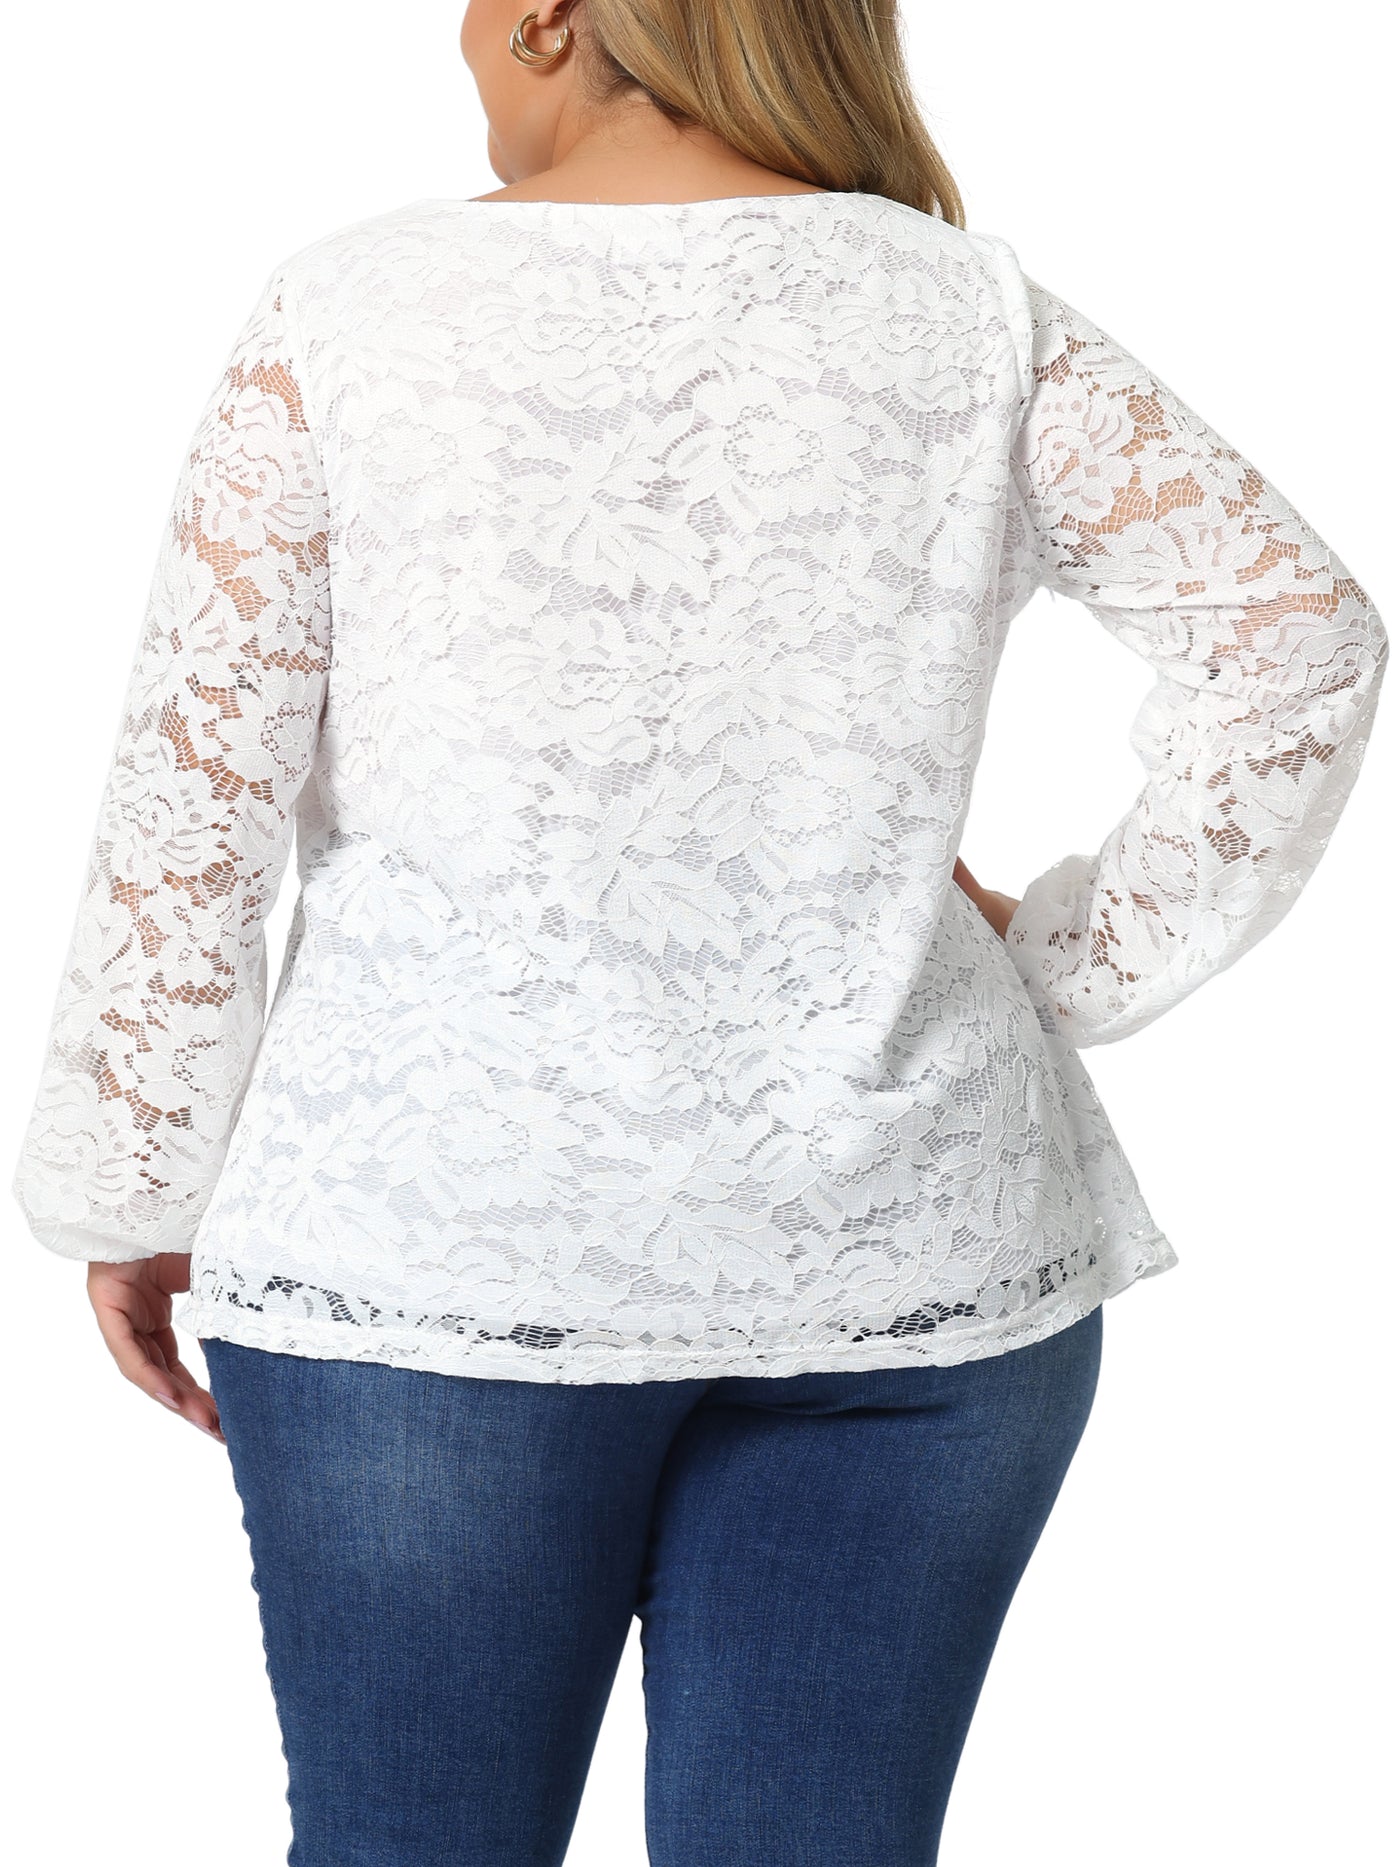 Bublédon Lace Blouse for Women Plus Size Sheer Long Sleeve Elastic Cuff Layer Cross V Neck Tops